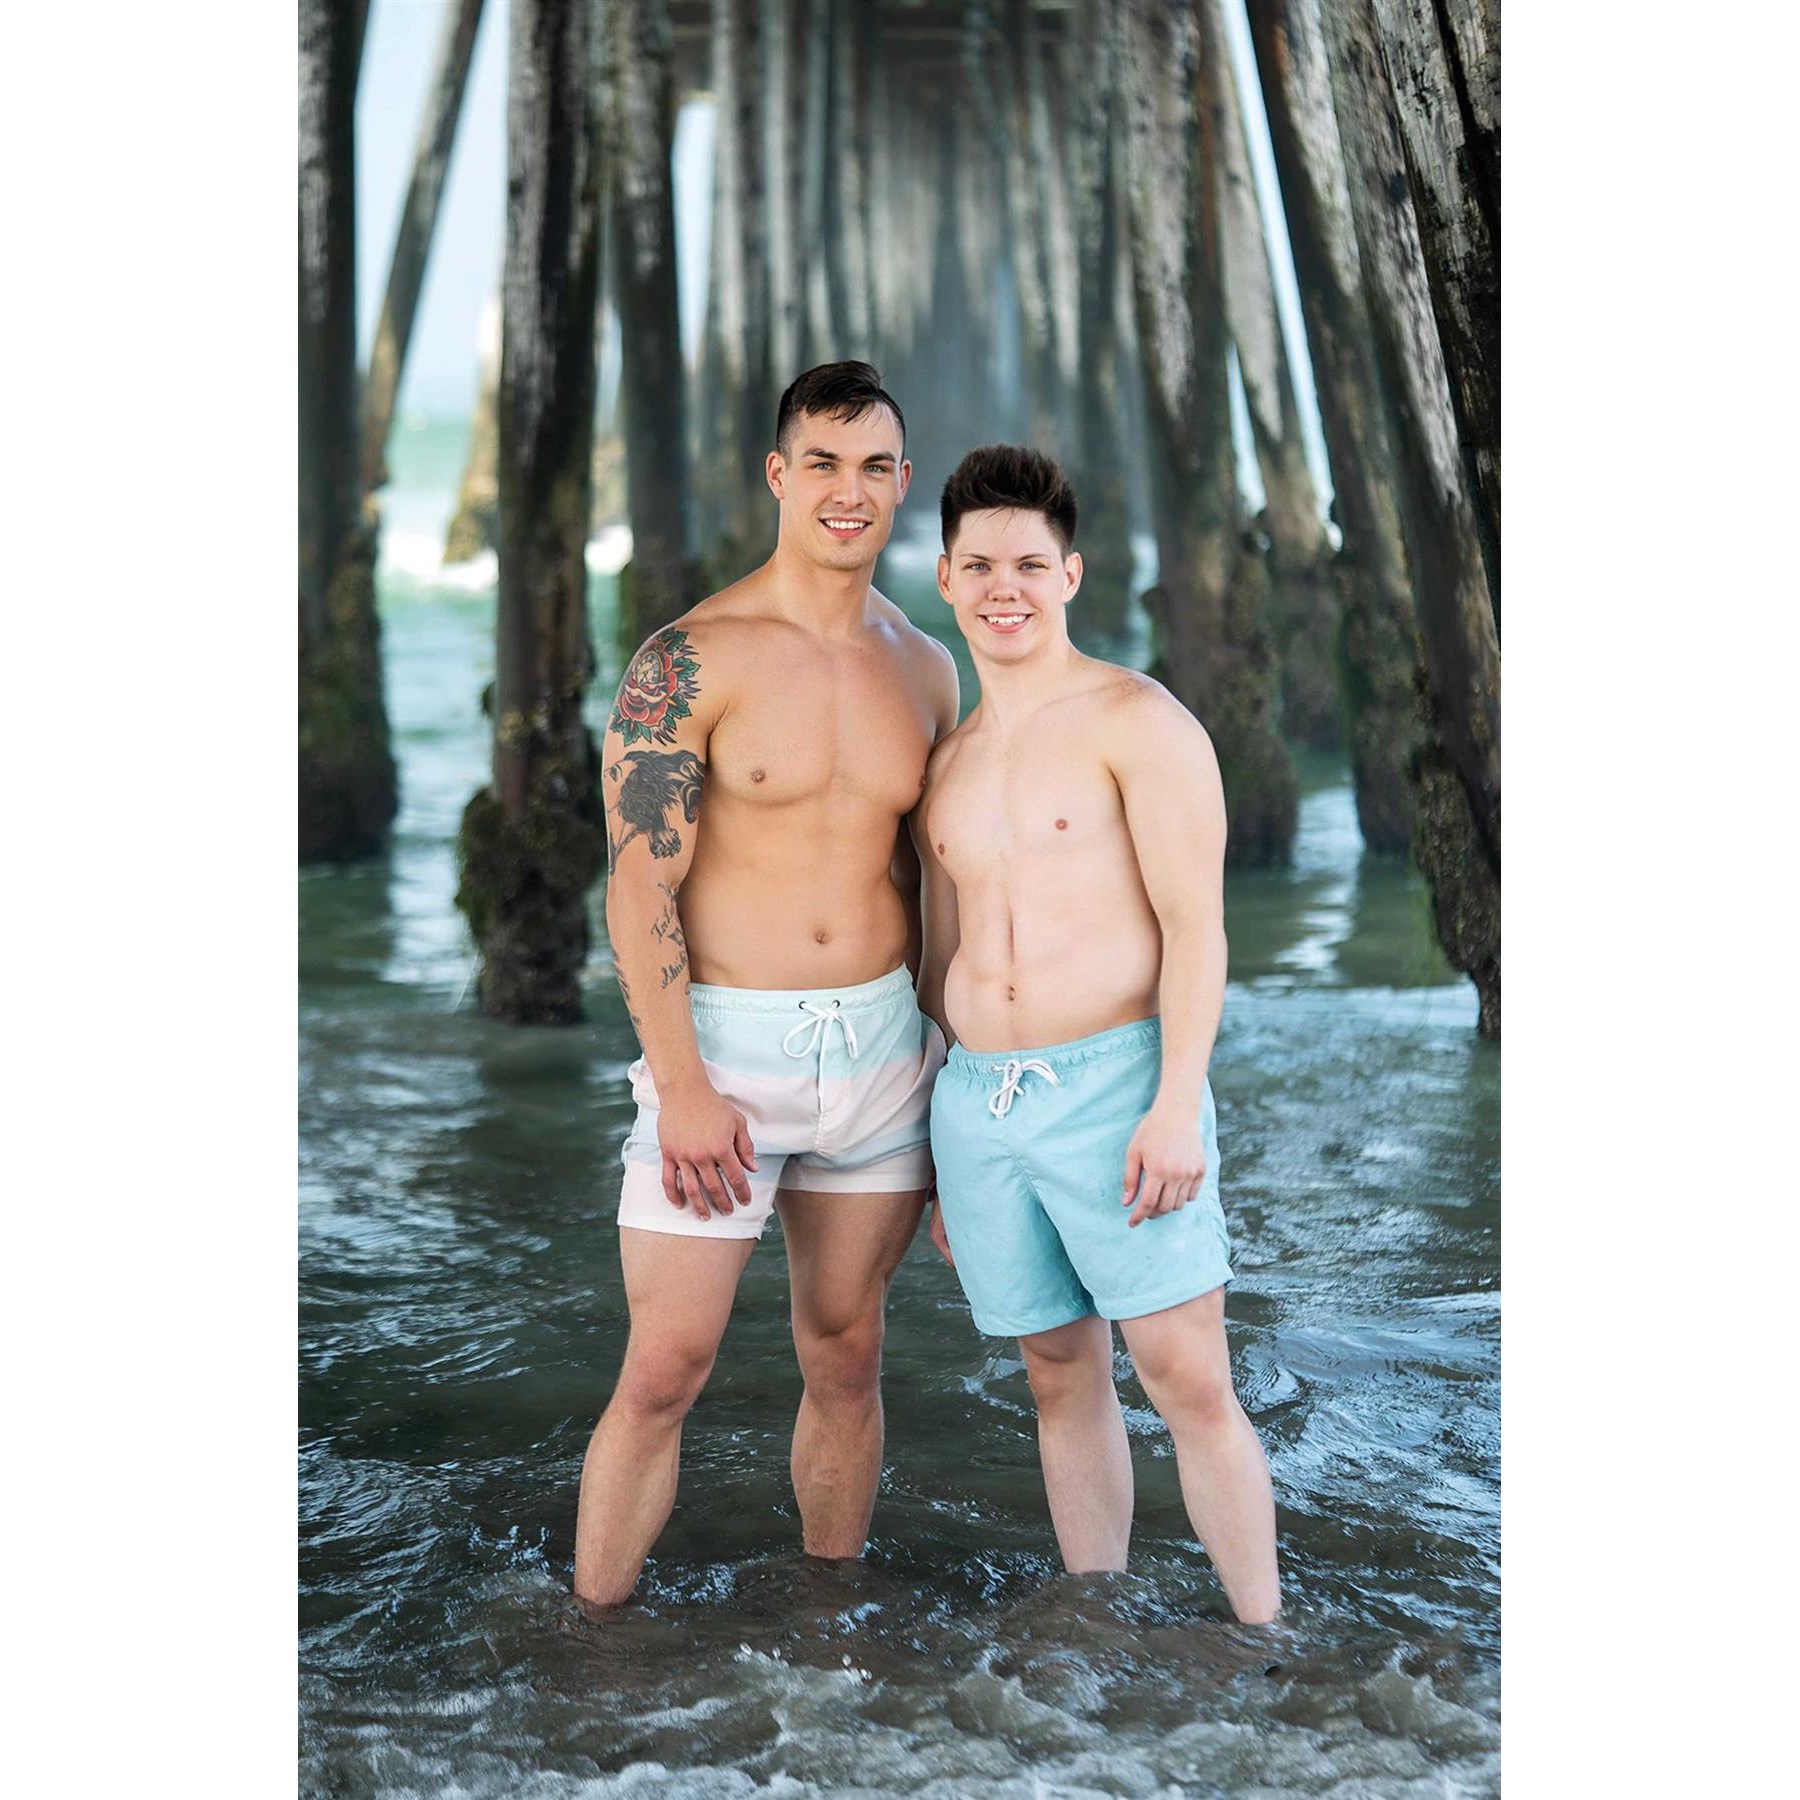 Two topless males posed on beach wearing swim trunks